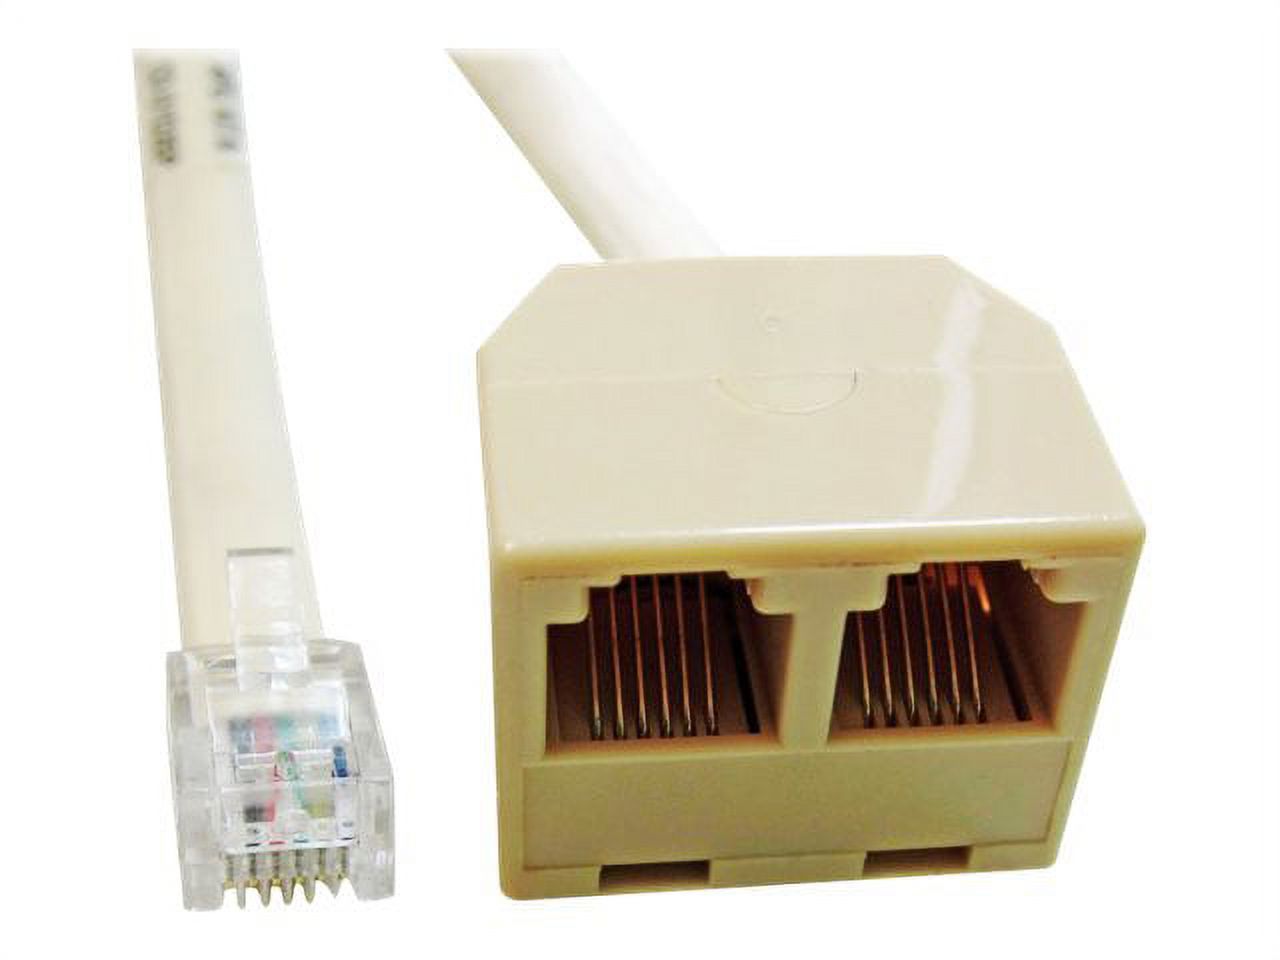 APG CD-D1D2EP Dual Drawer RJ-12 Male Splitter Cable for Epson Printers CDD1D2EP - image 1 of 7